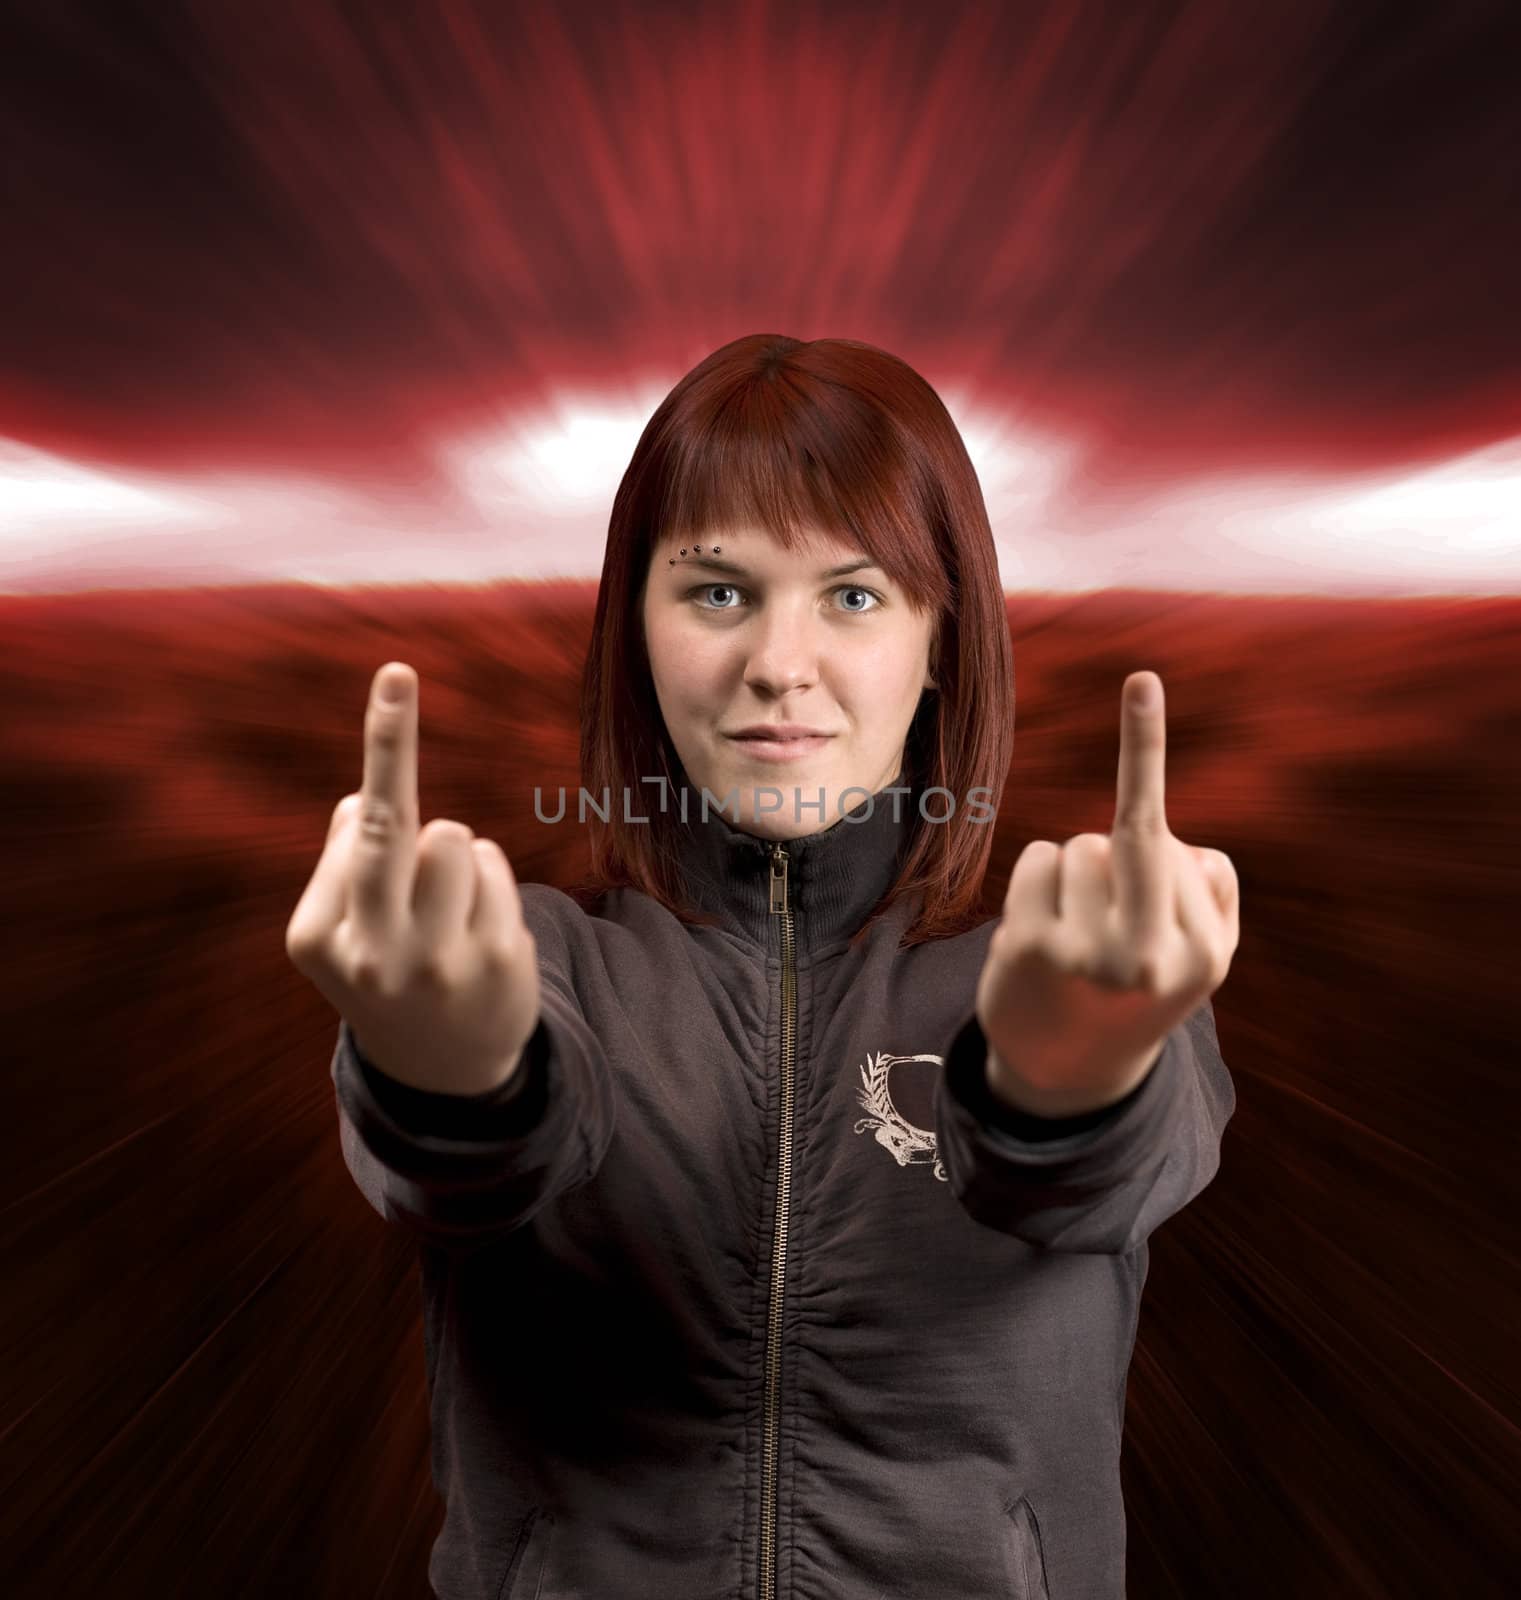 Redhead girl showing middle fingers with a dramatic apocalyptic background.